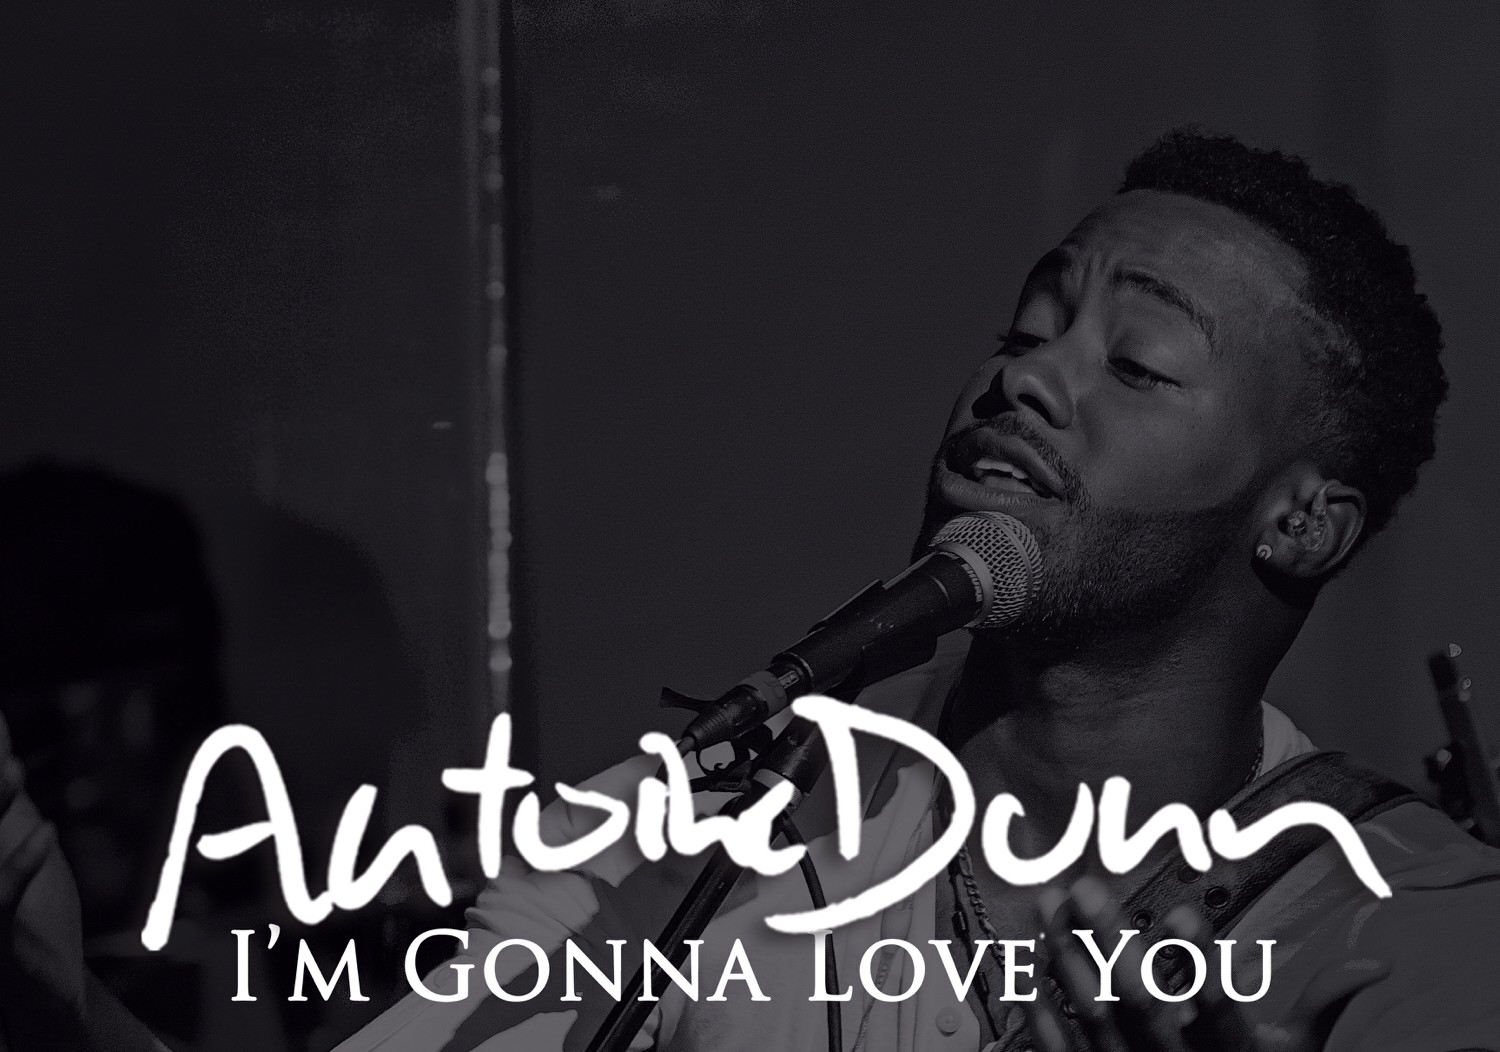 New Music: Antoine Dunn Returns With Single "I'm Gonna Love You", Signs with TopNotch Music